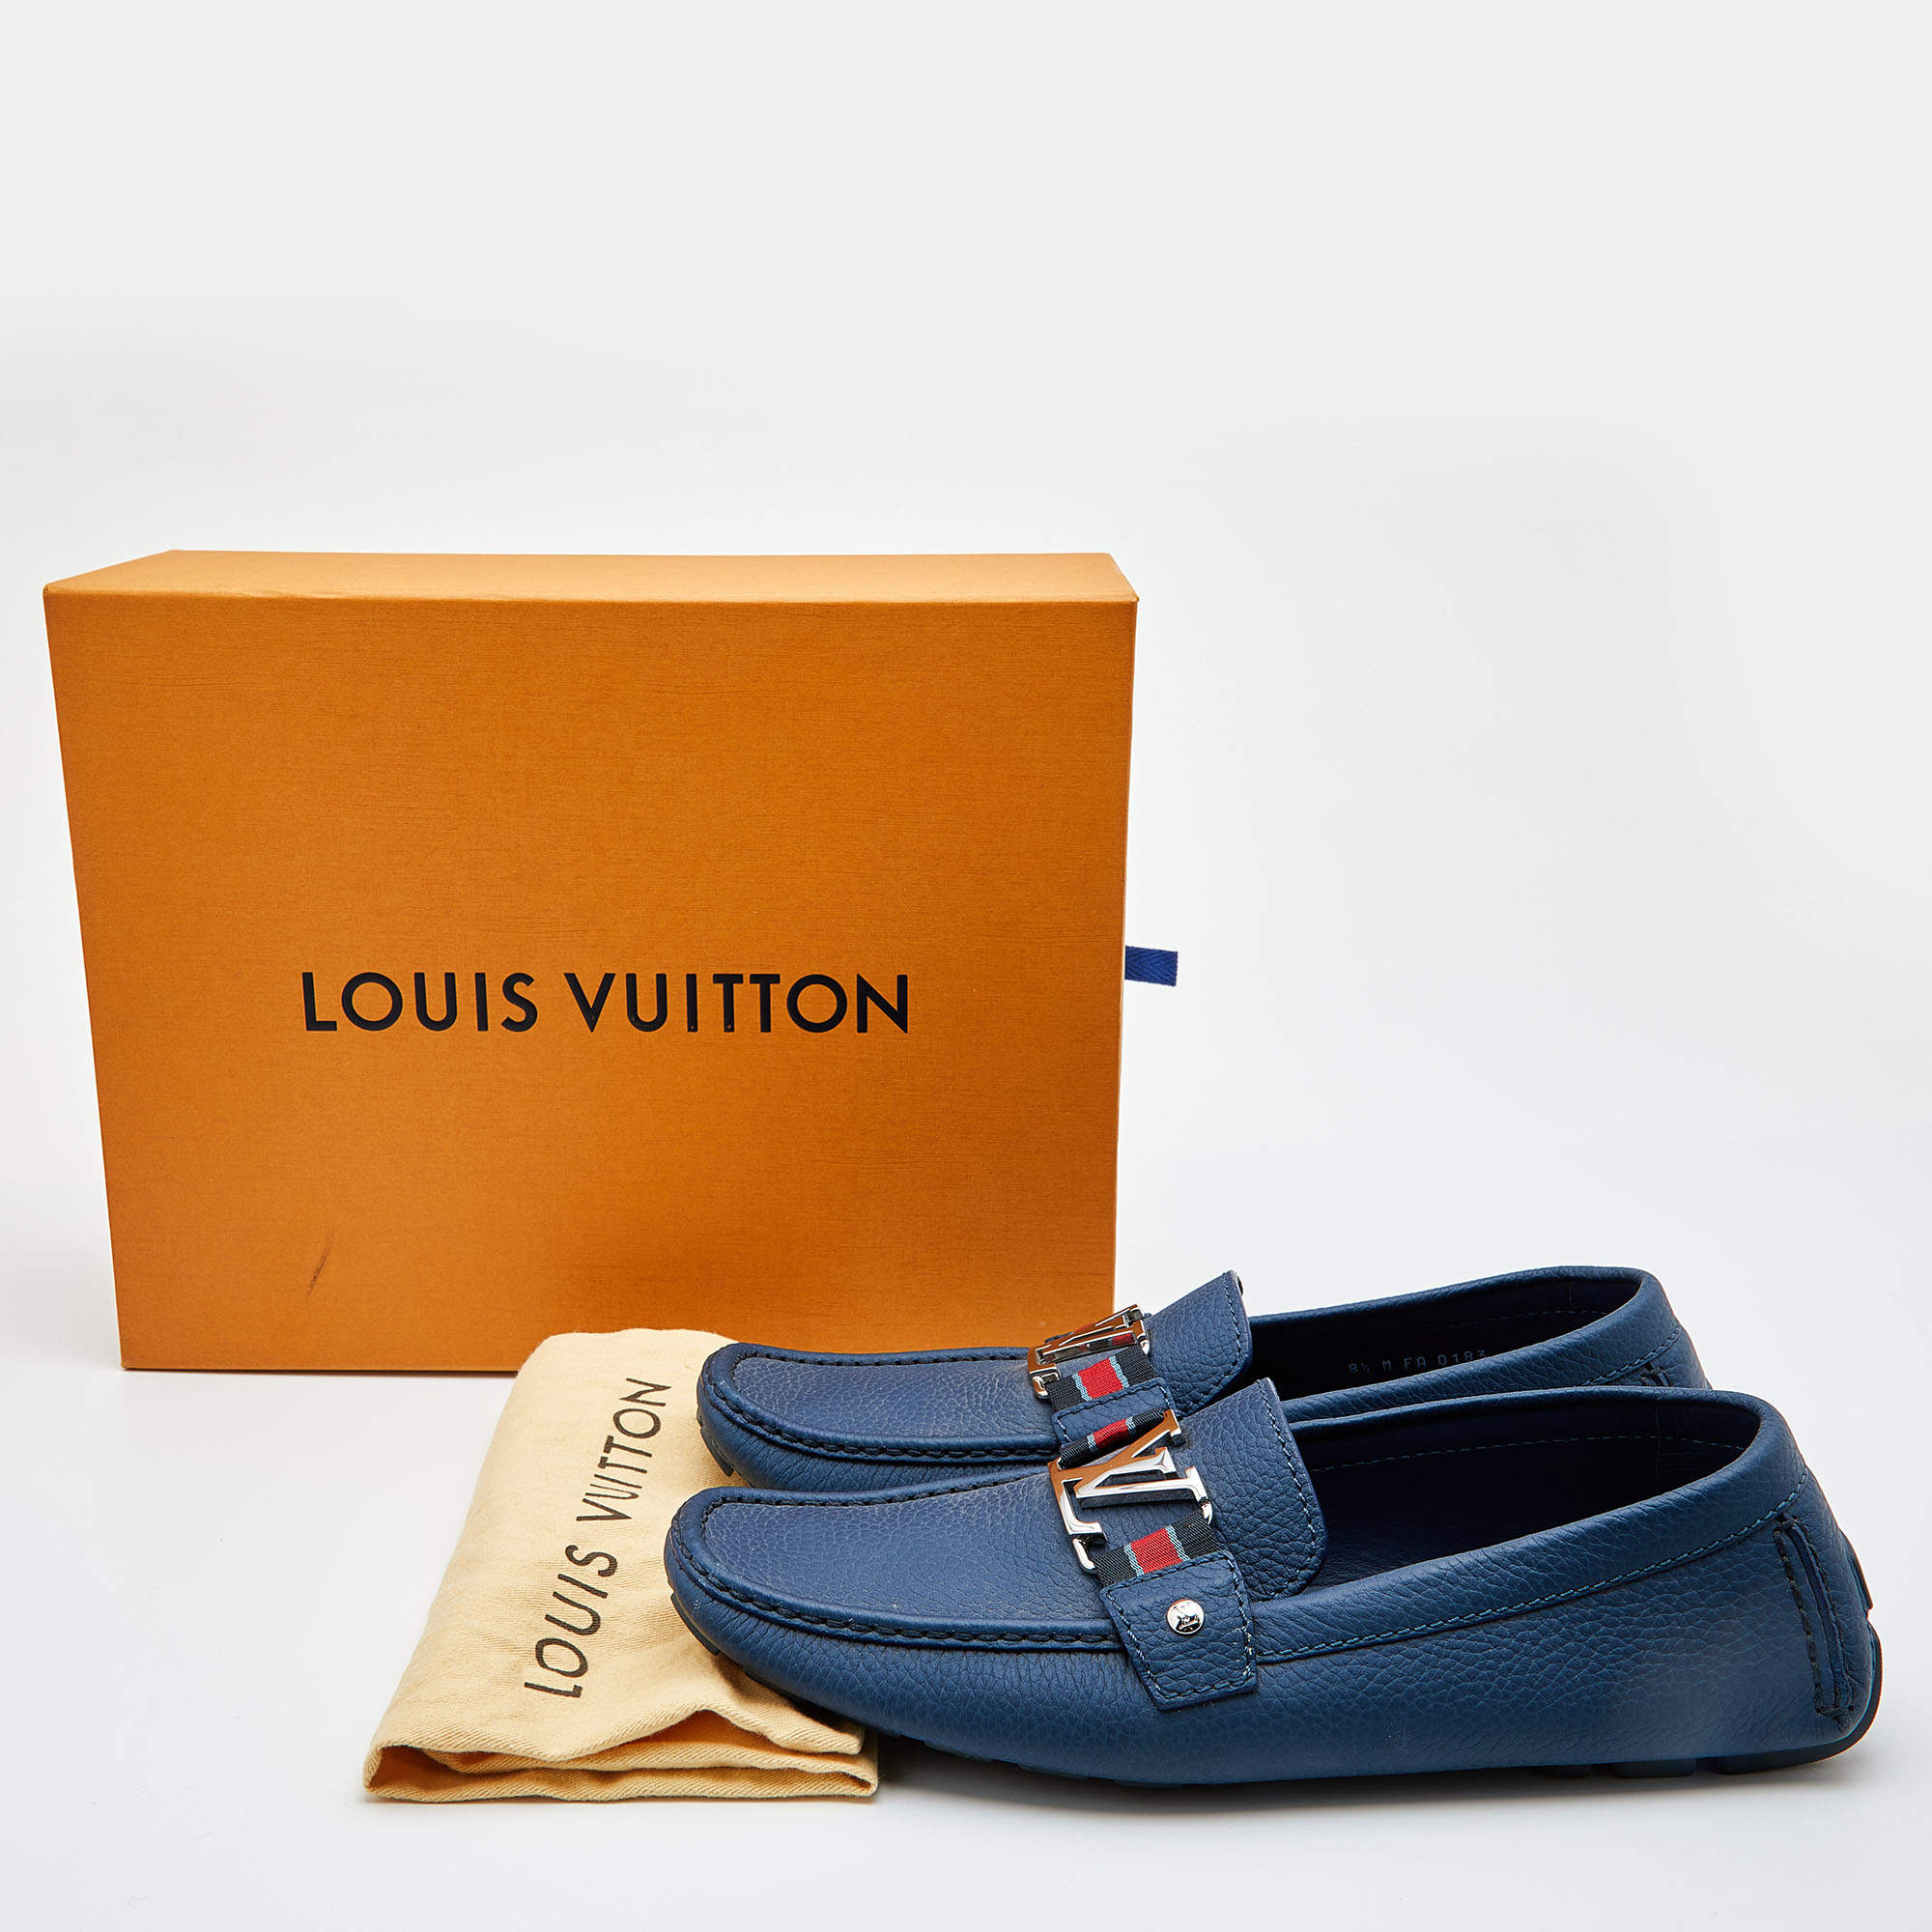 Monte carlo leather flats Louis Vuitton Blue size 42 EU in Leather -  34445700